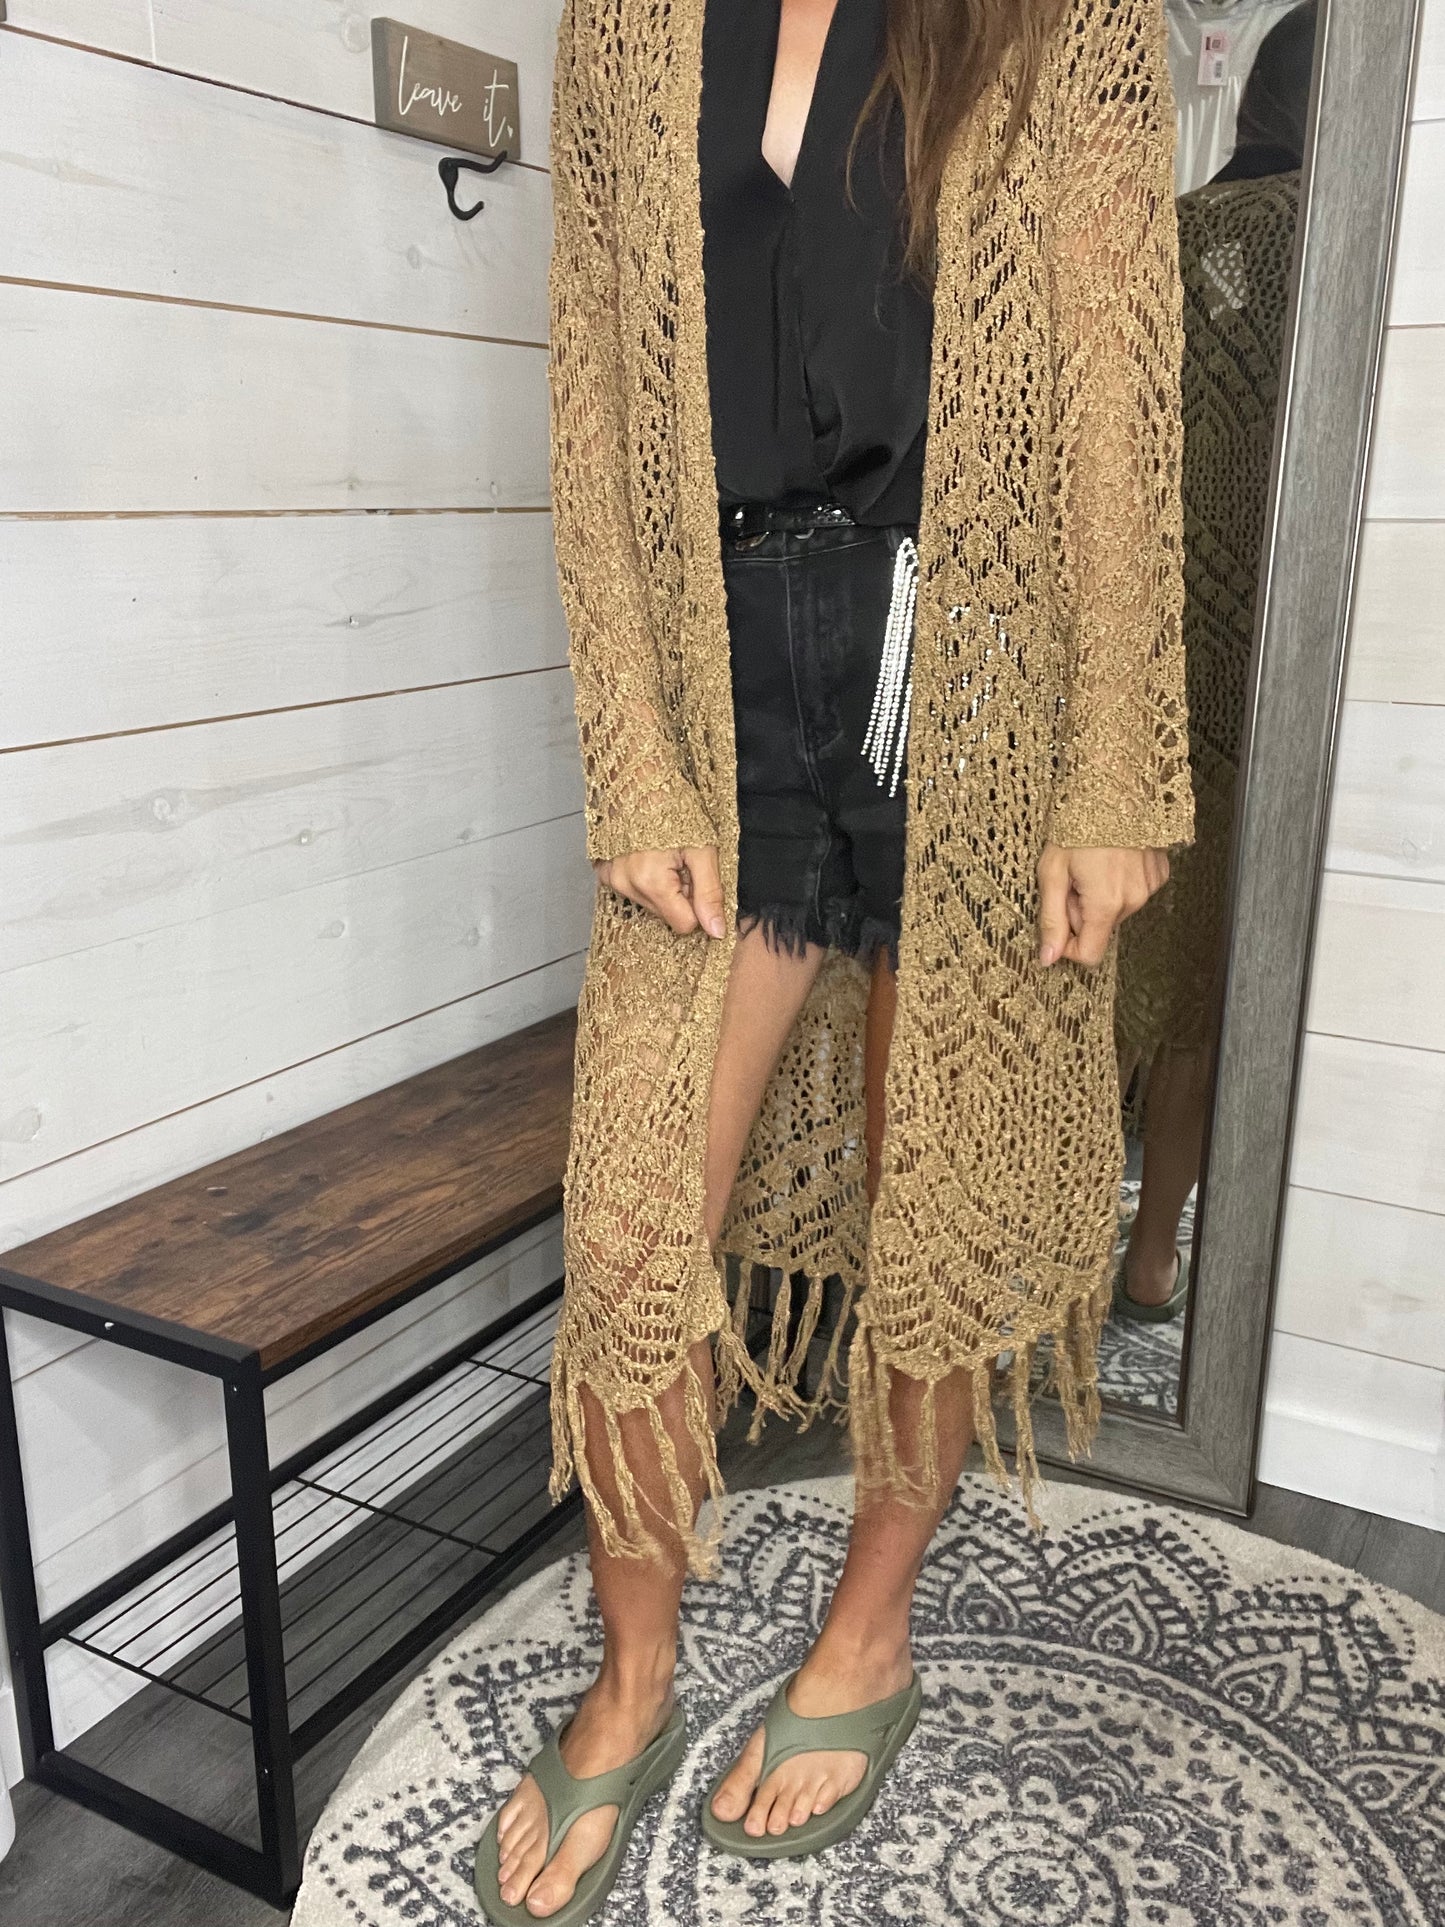 WESTERN SOFT KNIT CARDIGAN WITH FRINGES 2 COLOR options